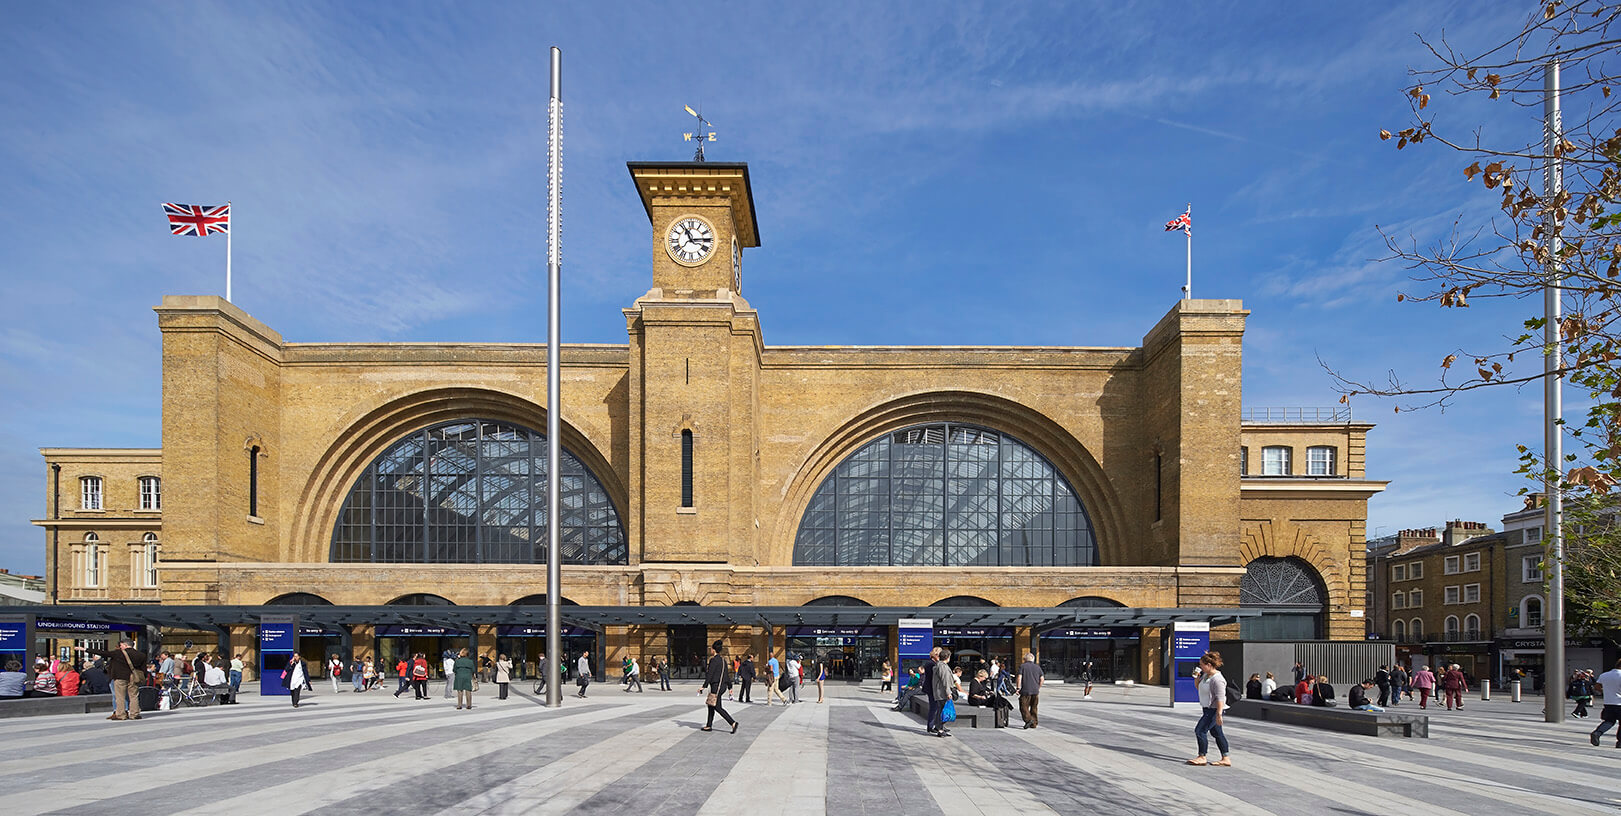 London King’s Cross - Facilities, Shops and Parking Information